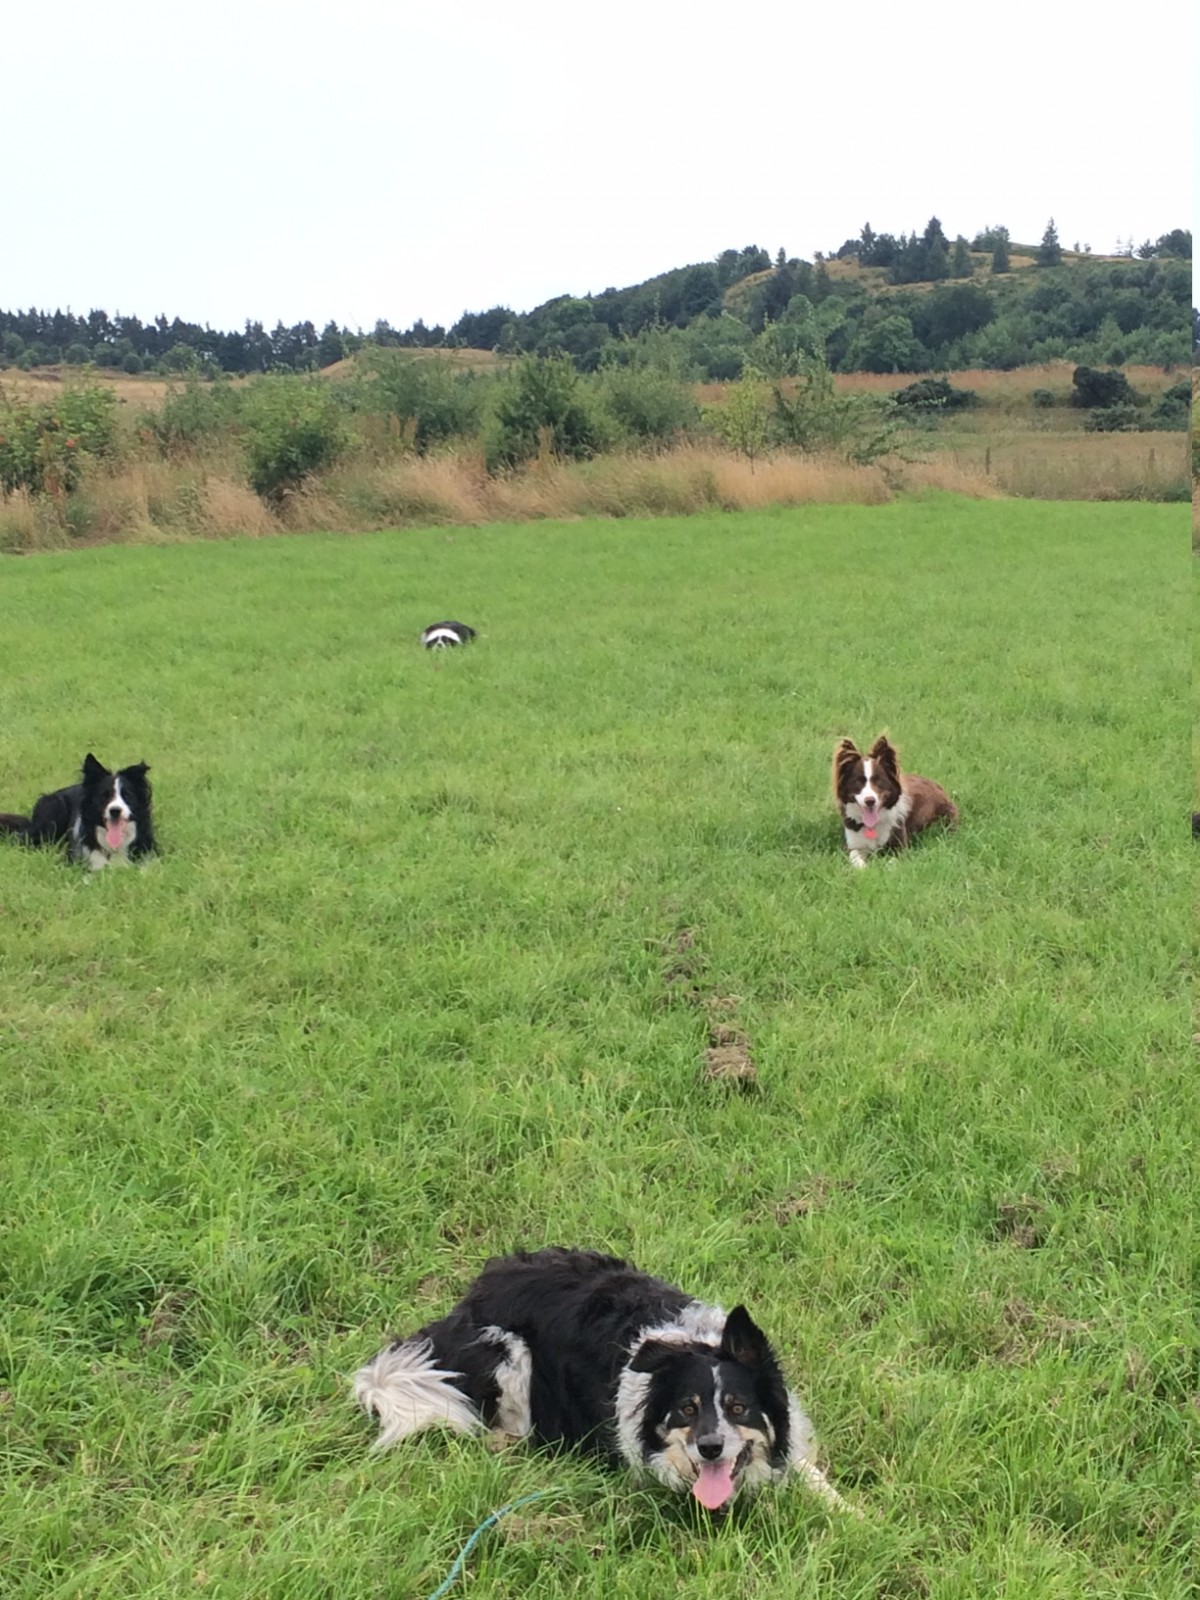 Thanks to Lynne for sending us in this diamond formation of Border Collies! Drift, Mist, Chase and Caley.  They must be super smart and obedient!